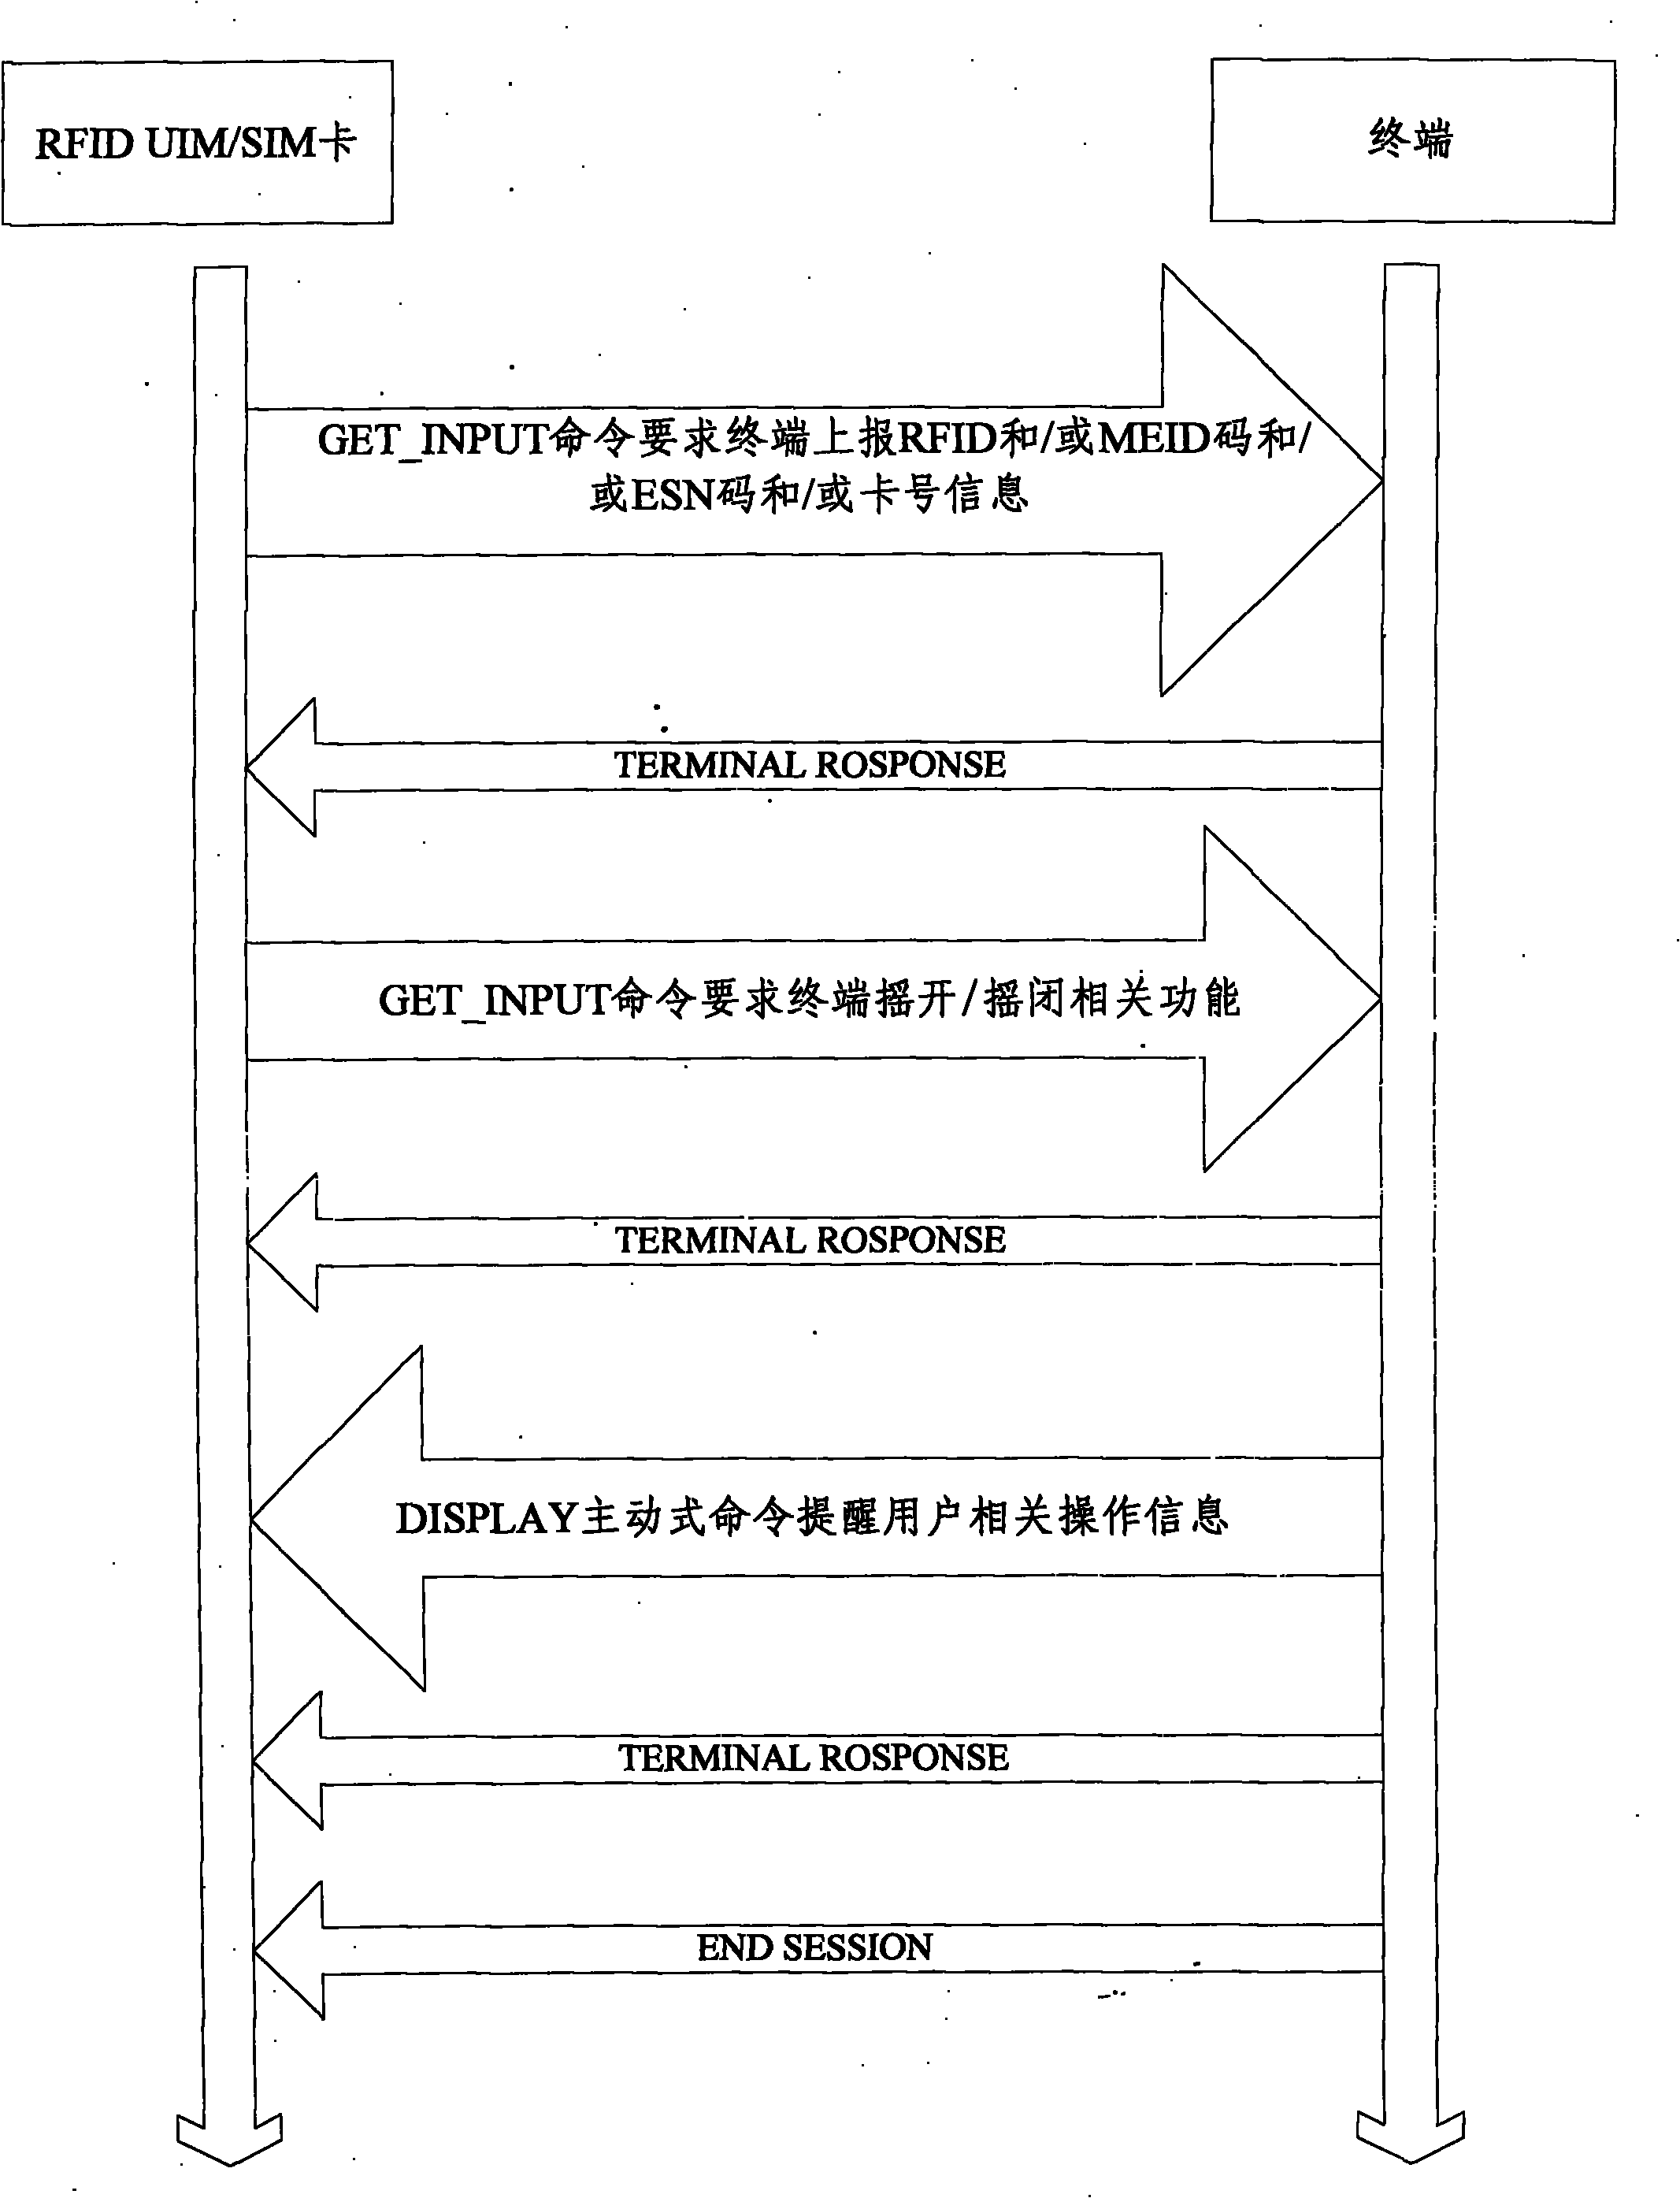 Method for remotely opening and closing radio frequency identification (RFID) user identity module (UIM)/subscriber identity module (SIM) card terminal